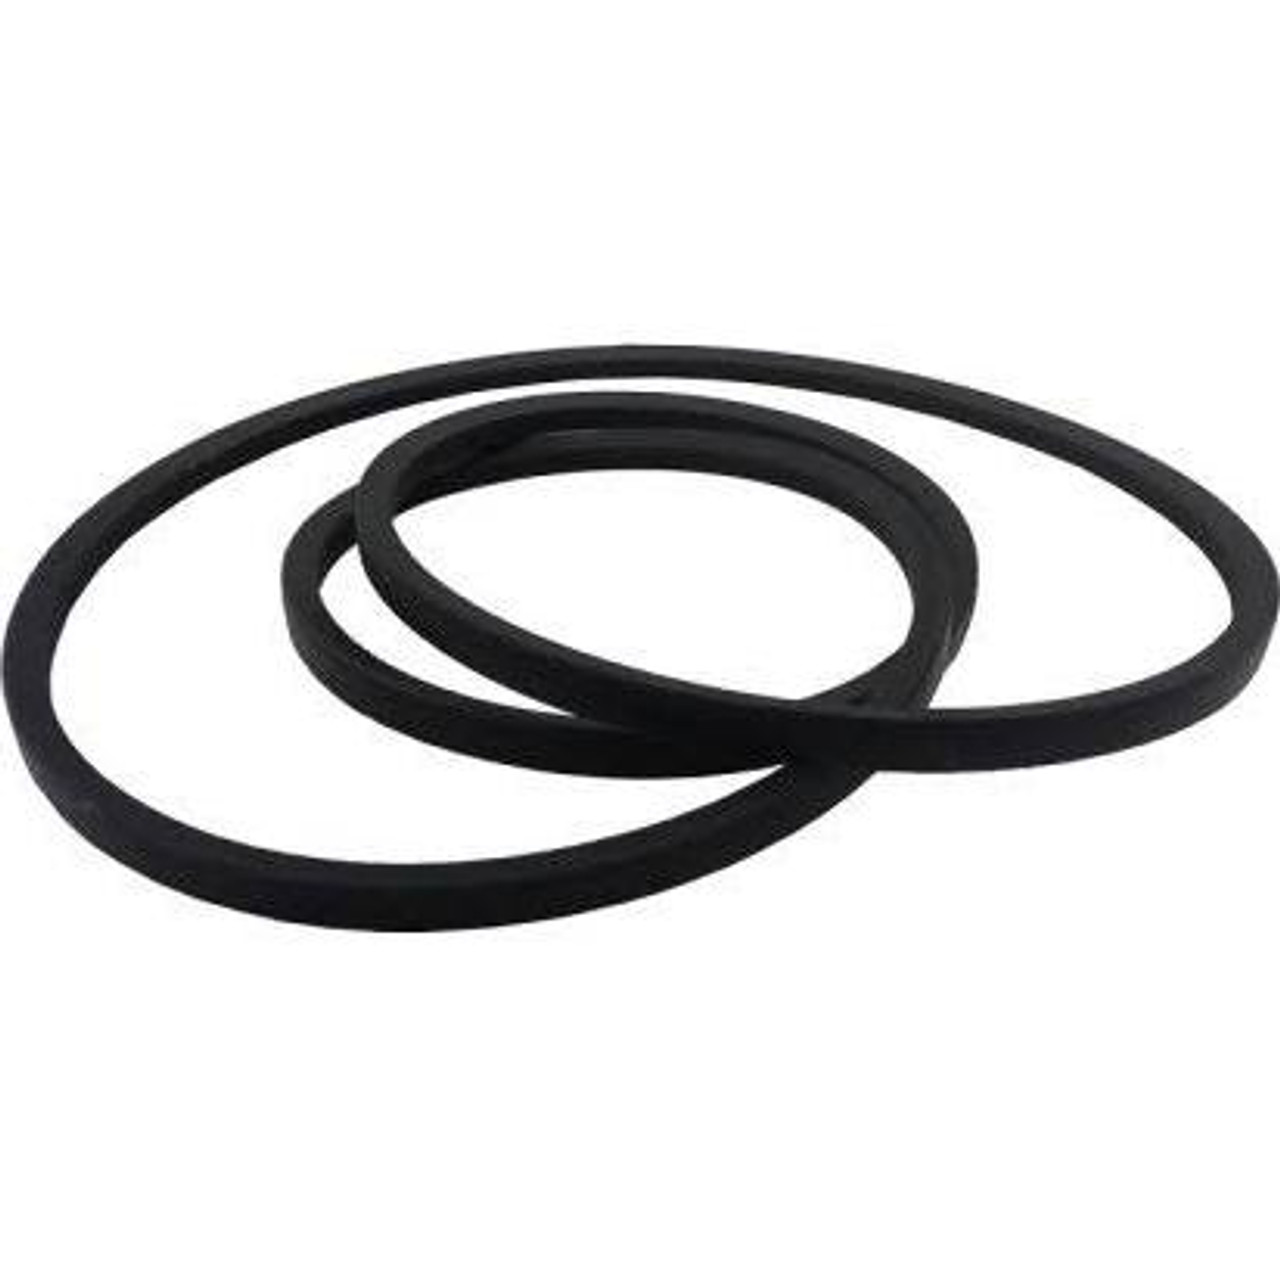 Replacement Exmark Mower Belt 1-613271 or 109-2584